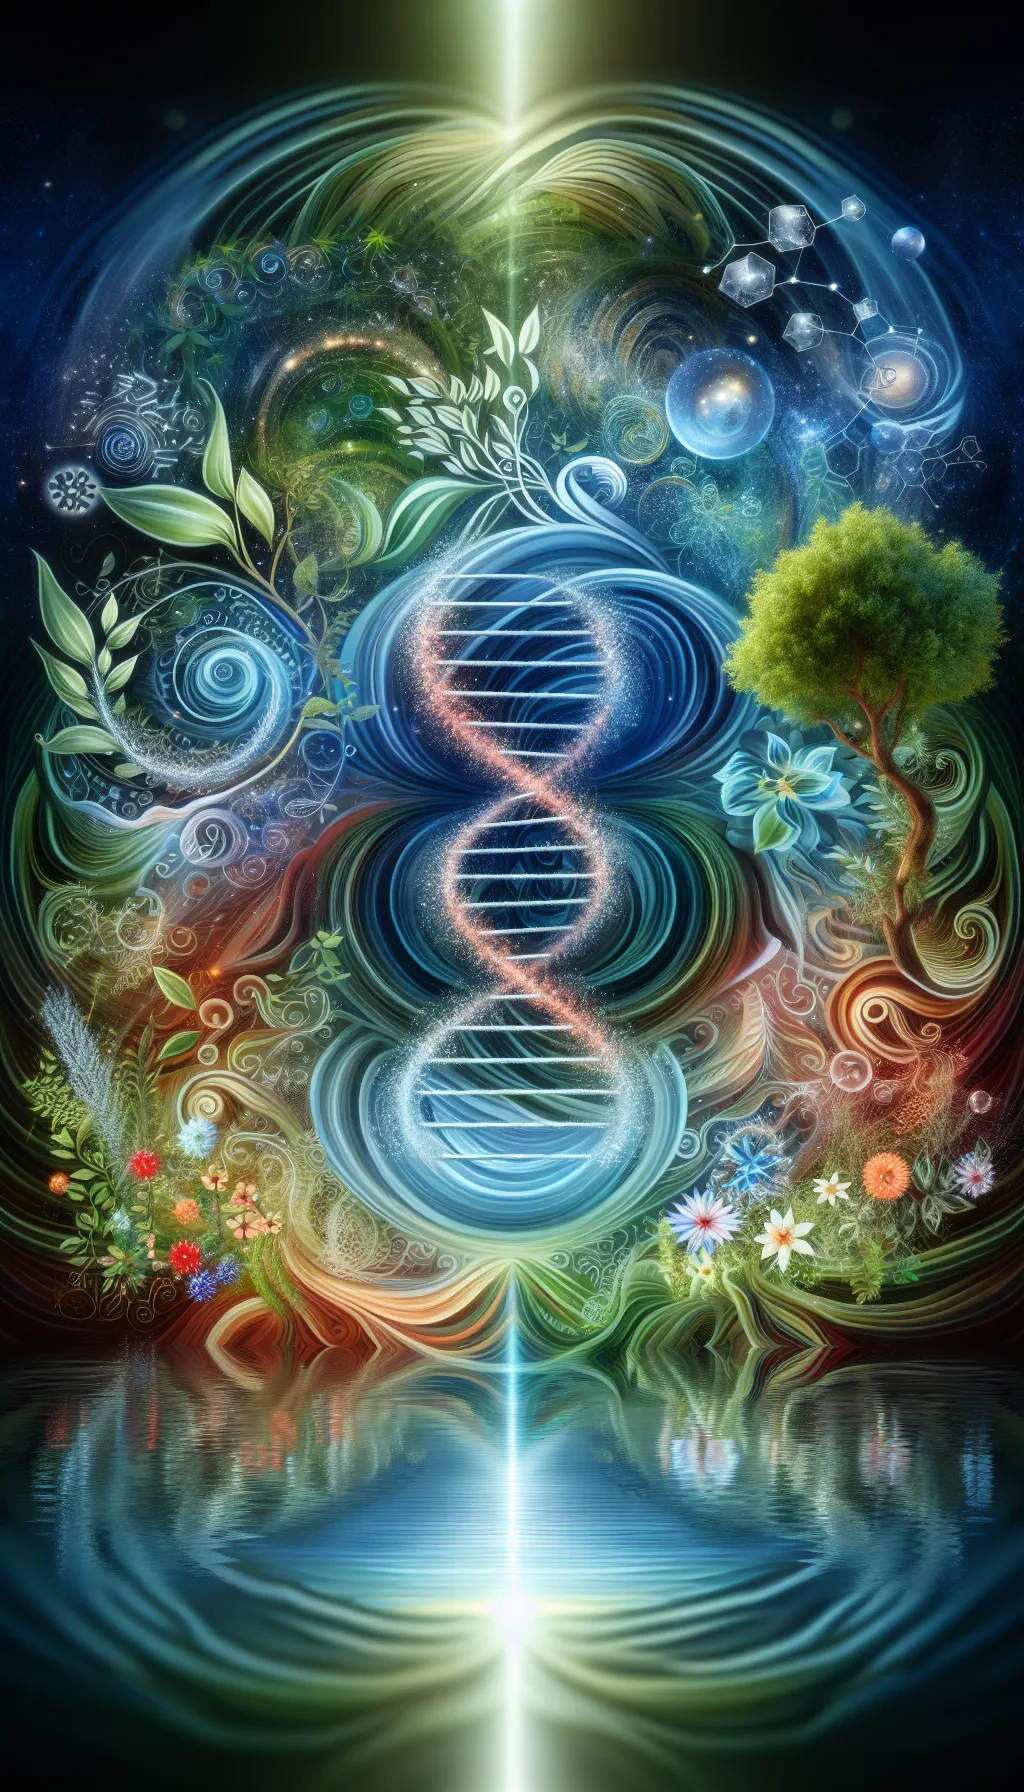 Every sensory experience in a coherent environment changes our DNA for the better in terms of which genes are expressed.